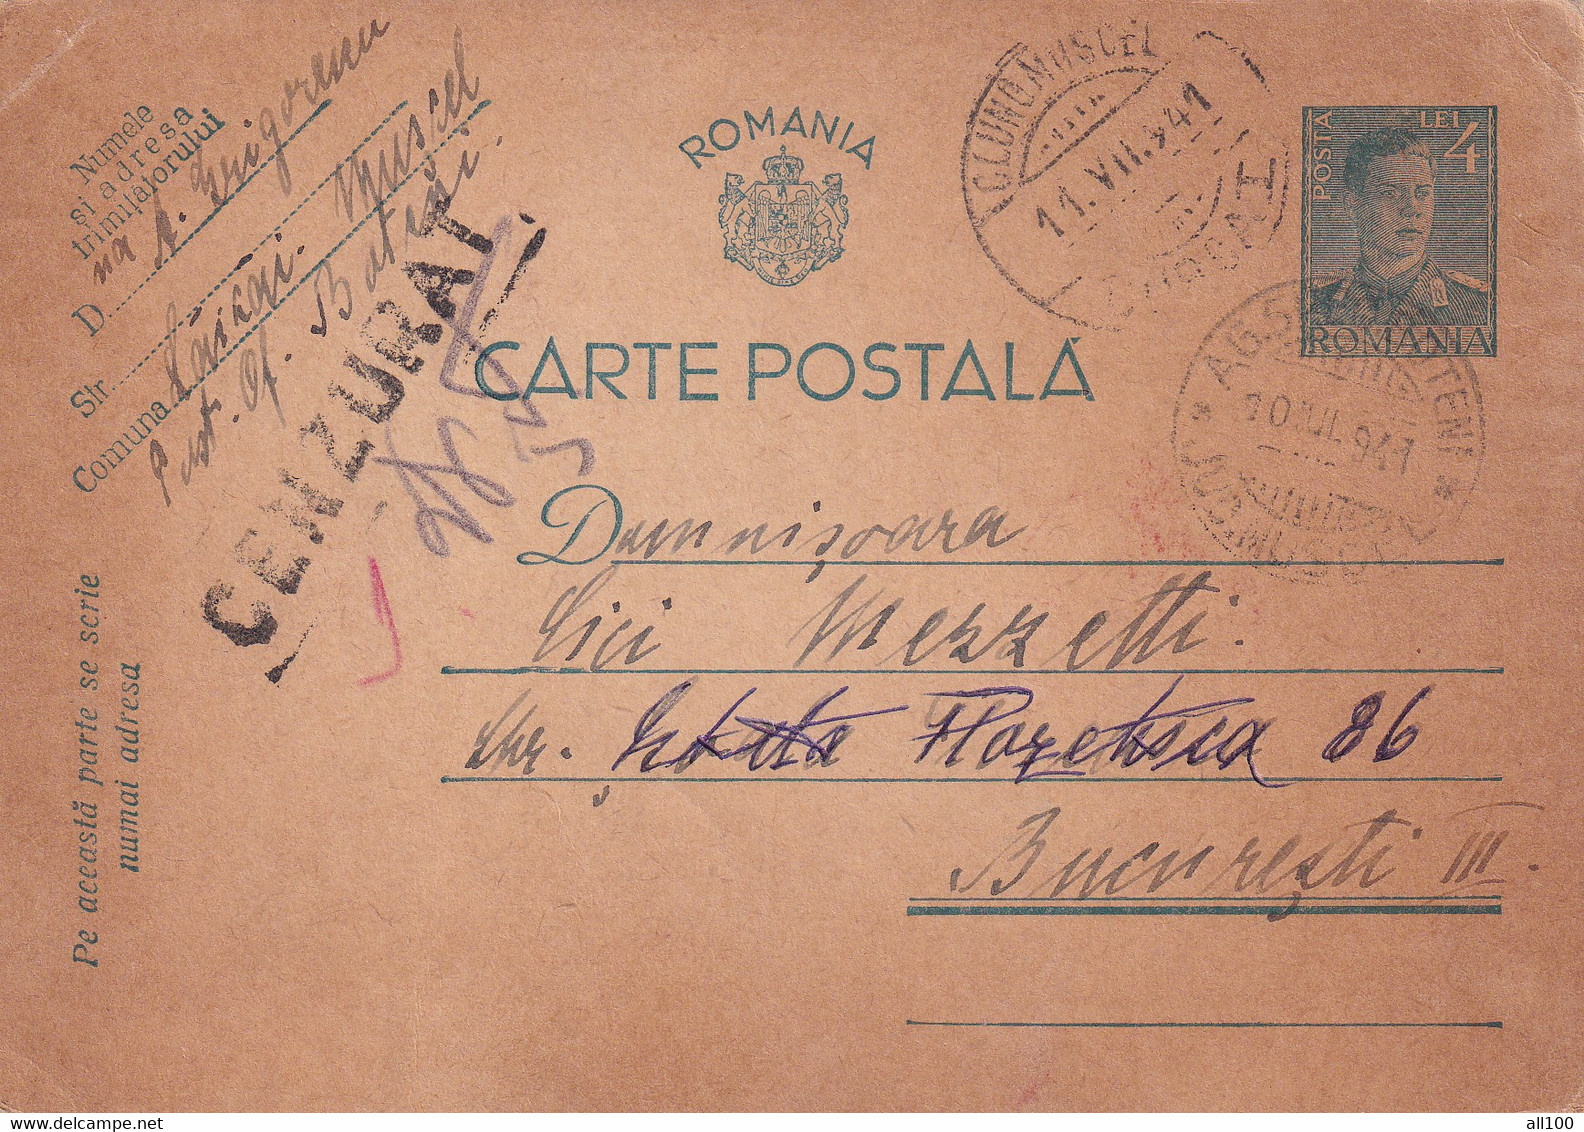 A16460 - MILITARY LETTER  POSTAL STATIONERY CENZORED CAMPULUNG MUSCEL  KING MICHAEL 4 LEI 1941 - Lettres 2ème Guerre Mondiale